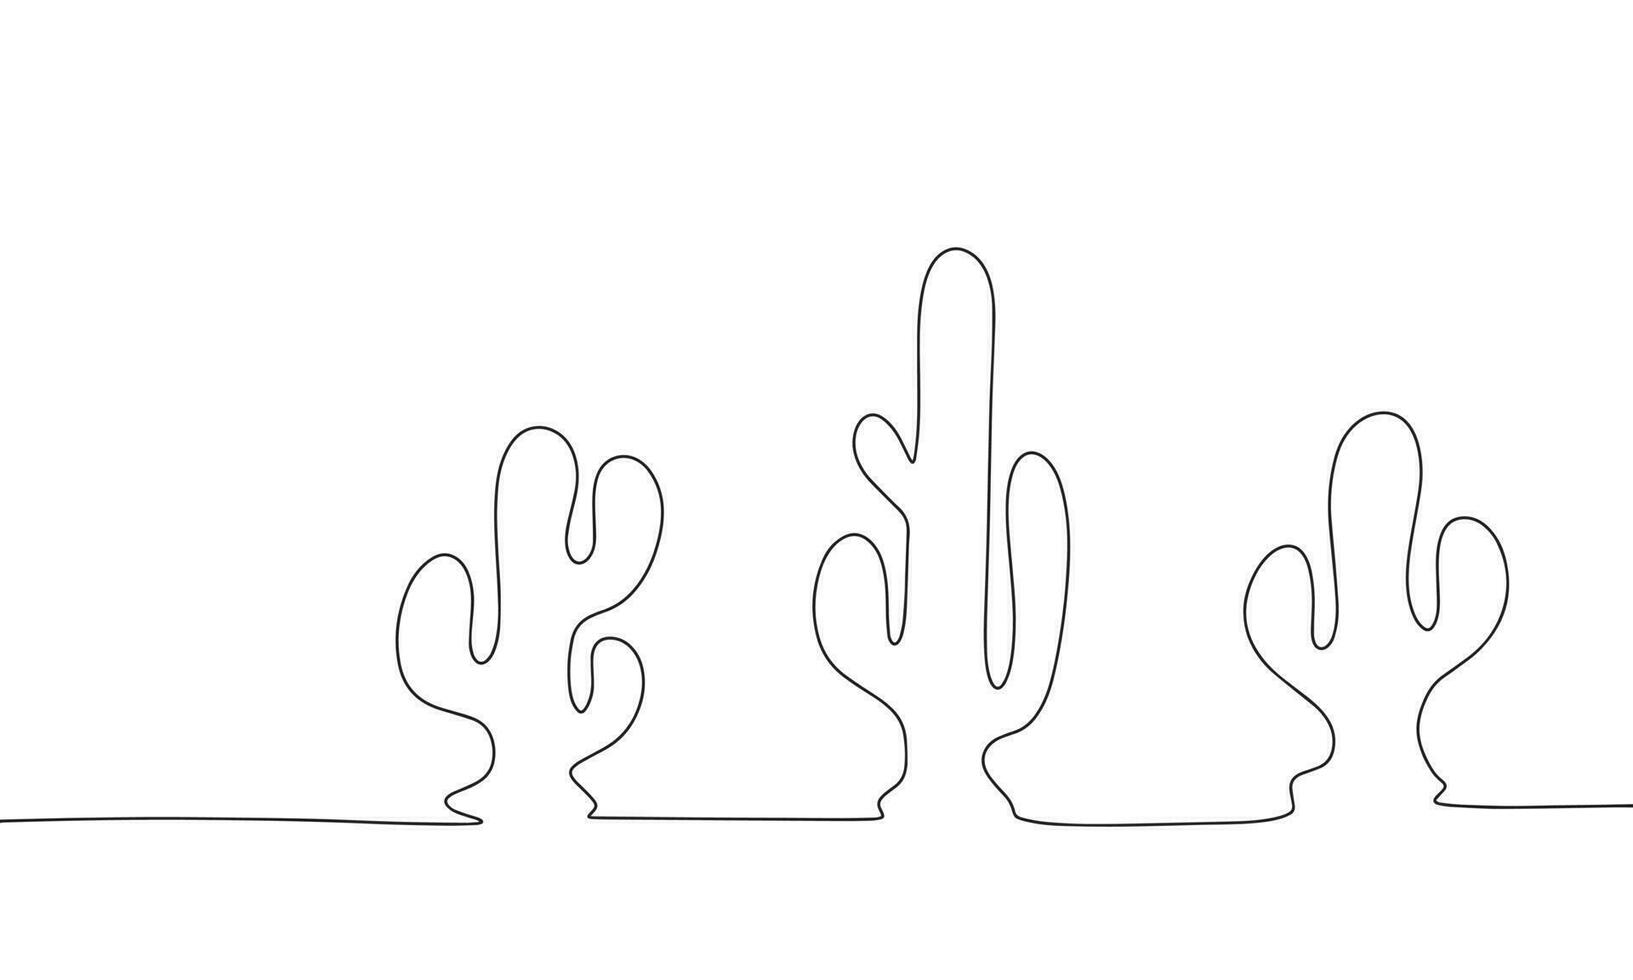 Silhouette cactus in row. One line continuous abstract conception of nature in desert. Line art, outline, silhouette, vector illustration.